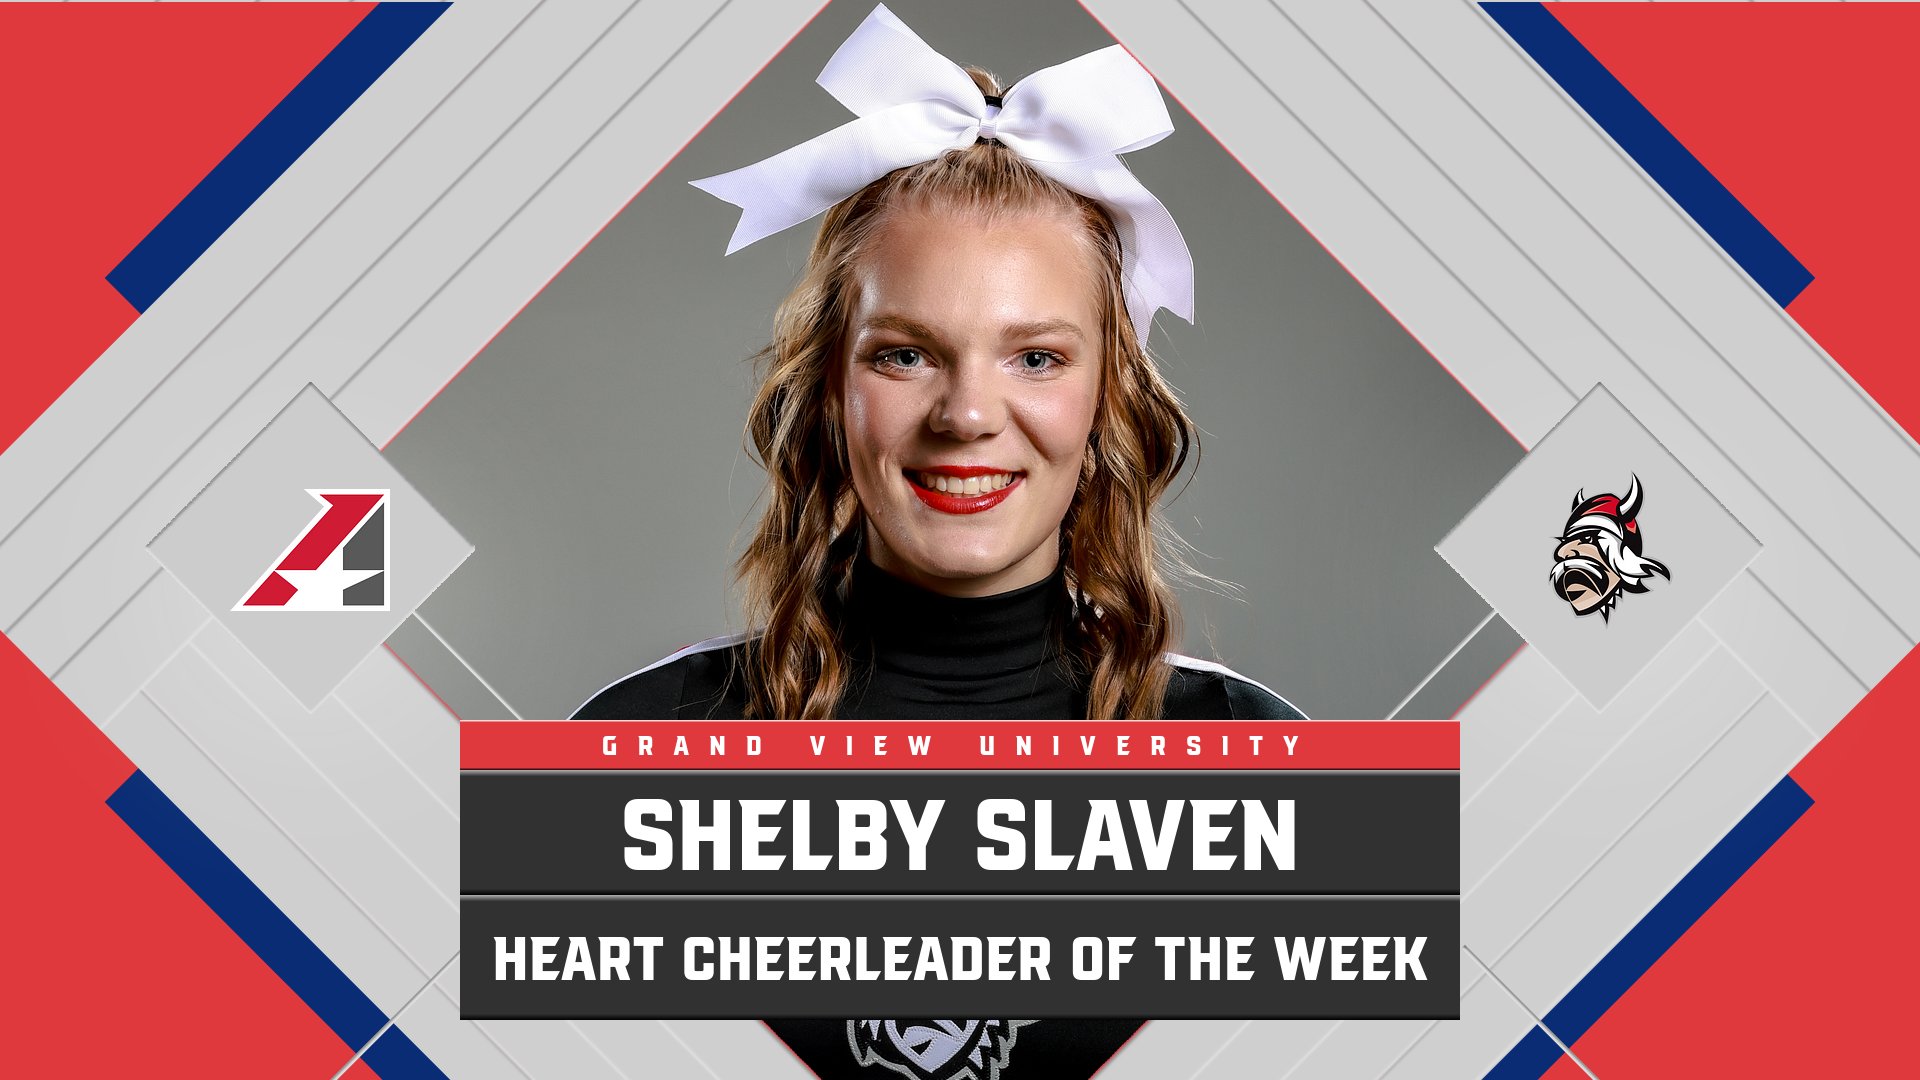 Grand View’s Shelby Slaven Named Heart Cheerleader of the Week